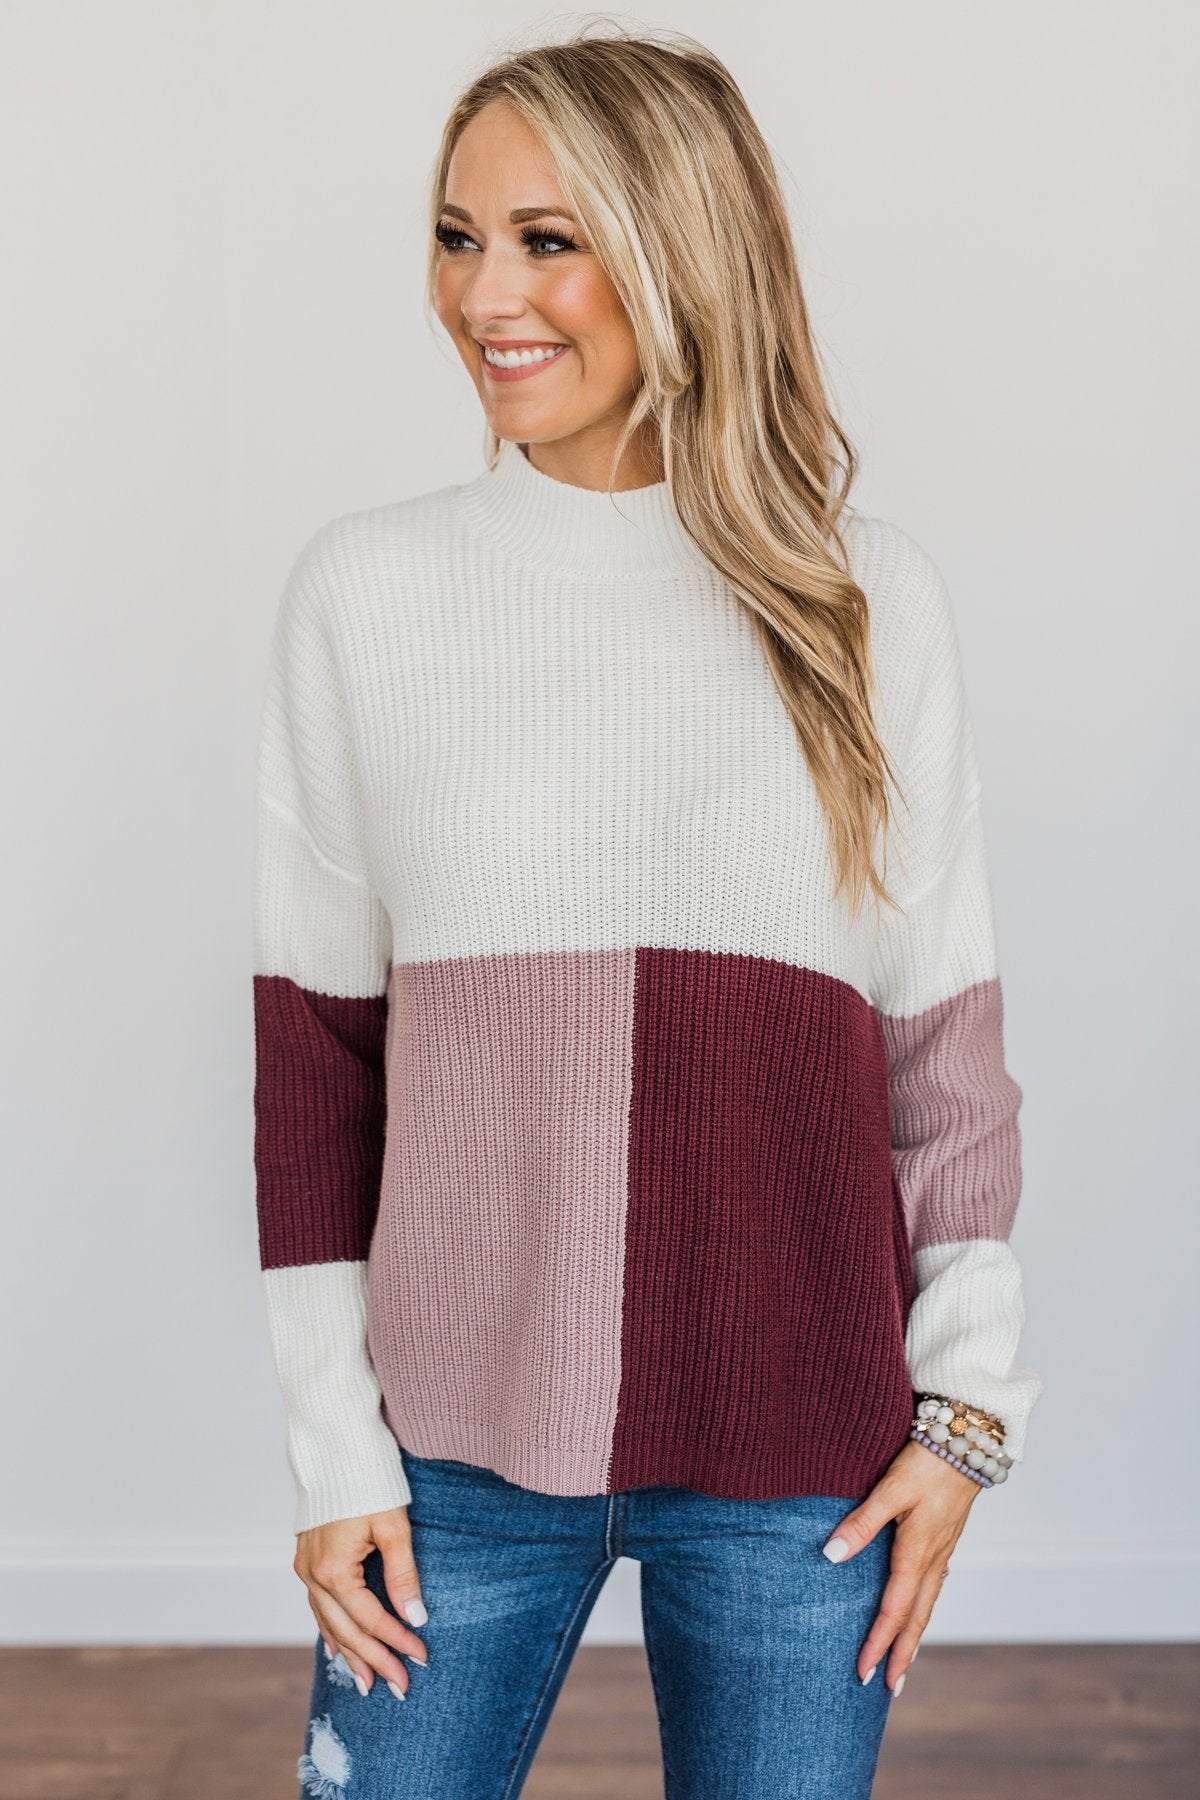 Lucky Brand Ladies' Colorblock Knit Sweater - Size large - Burgundy Gray  White